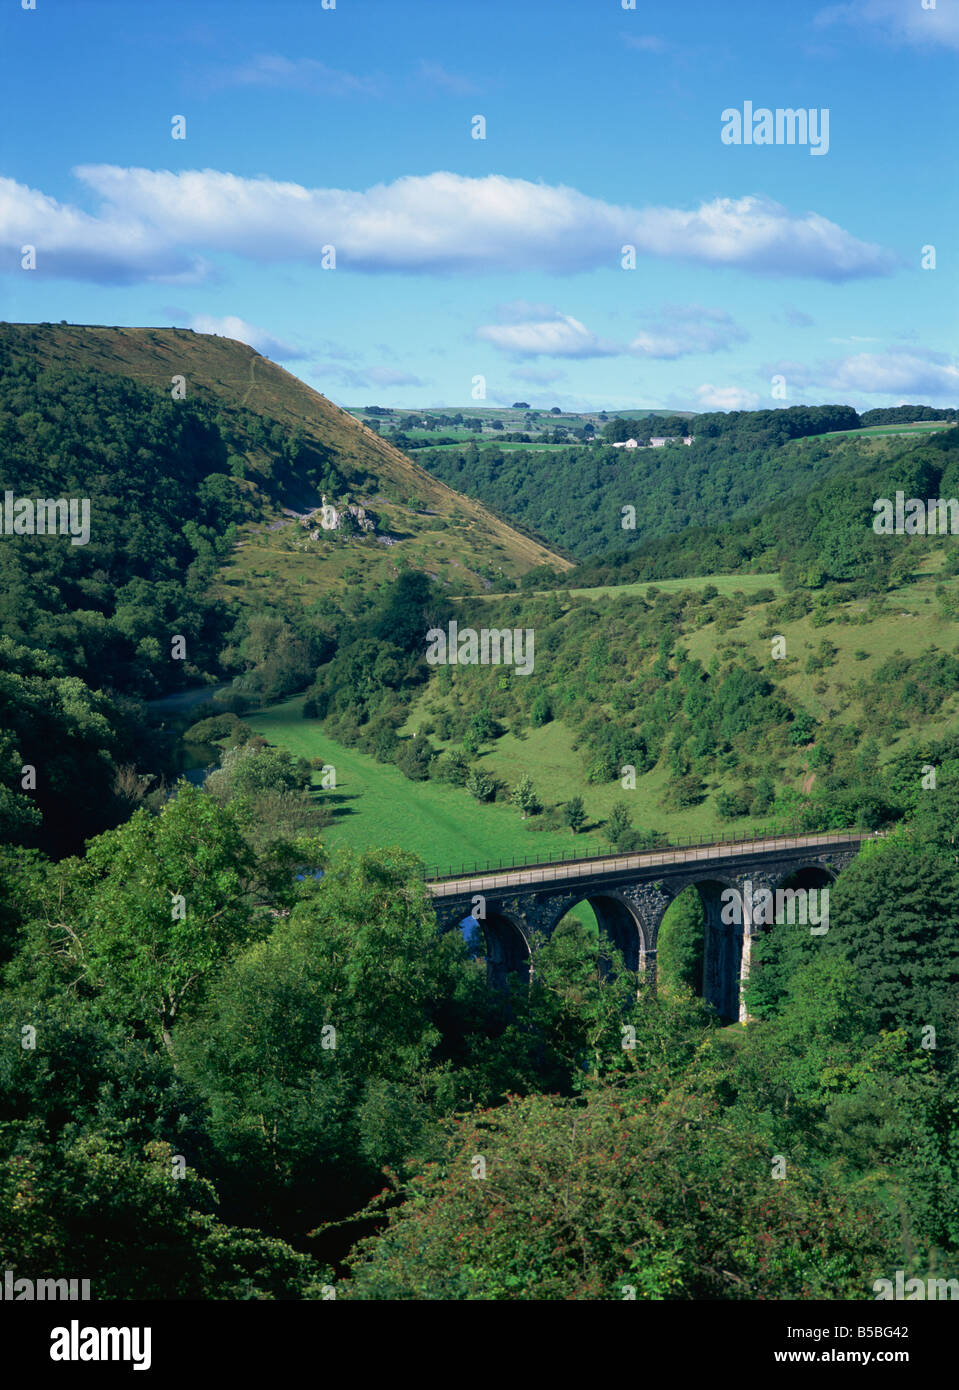 Dale and viaduct from Monsal Head, Monsal Dale, Derbyshire, England, Europe Stock Photo